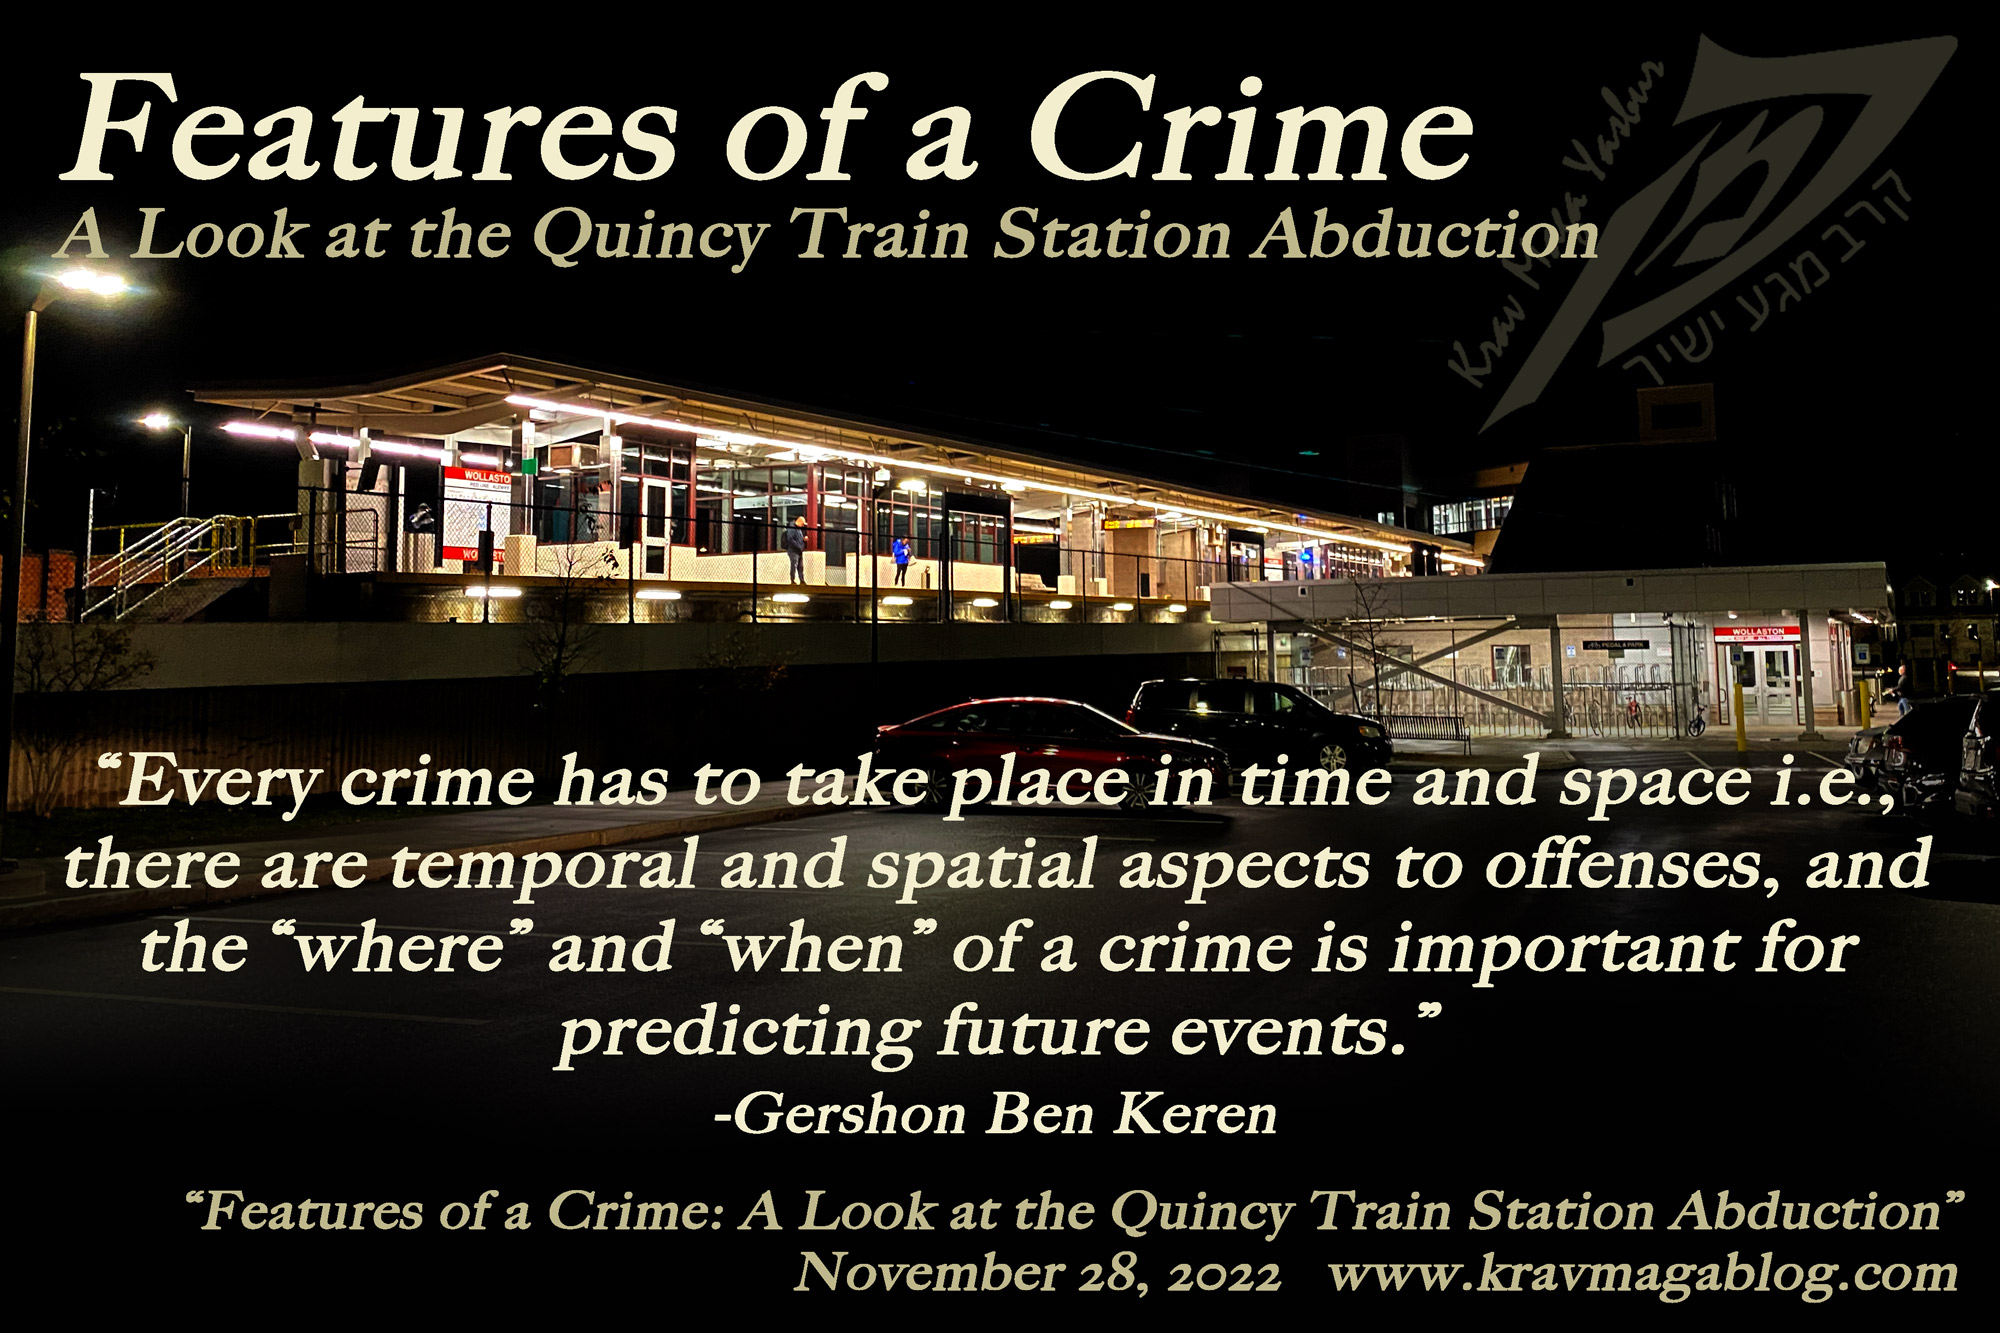 Features Of A Crime - The Quincy Train Station Abduction